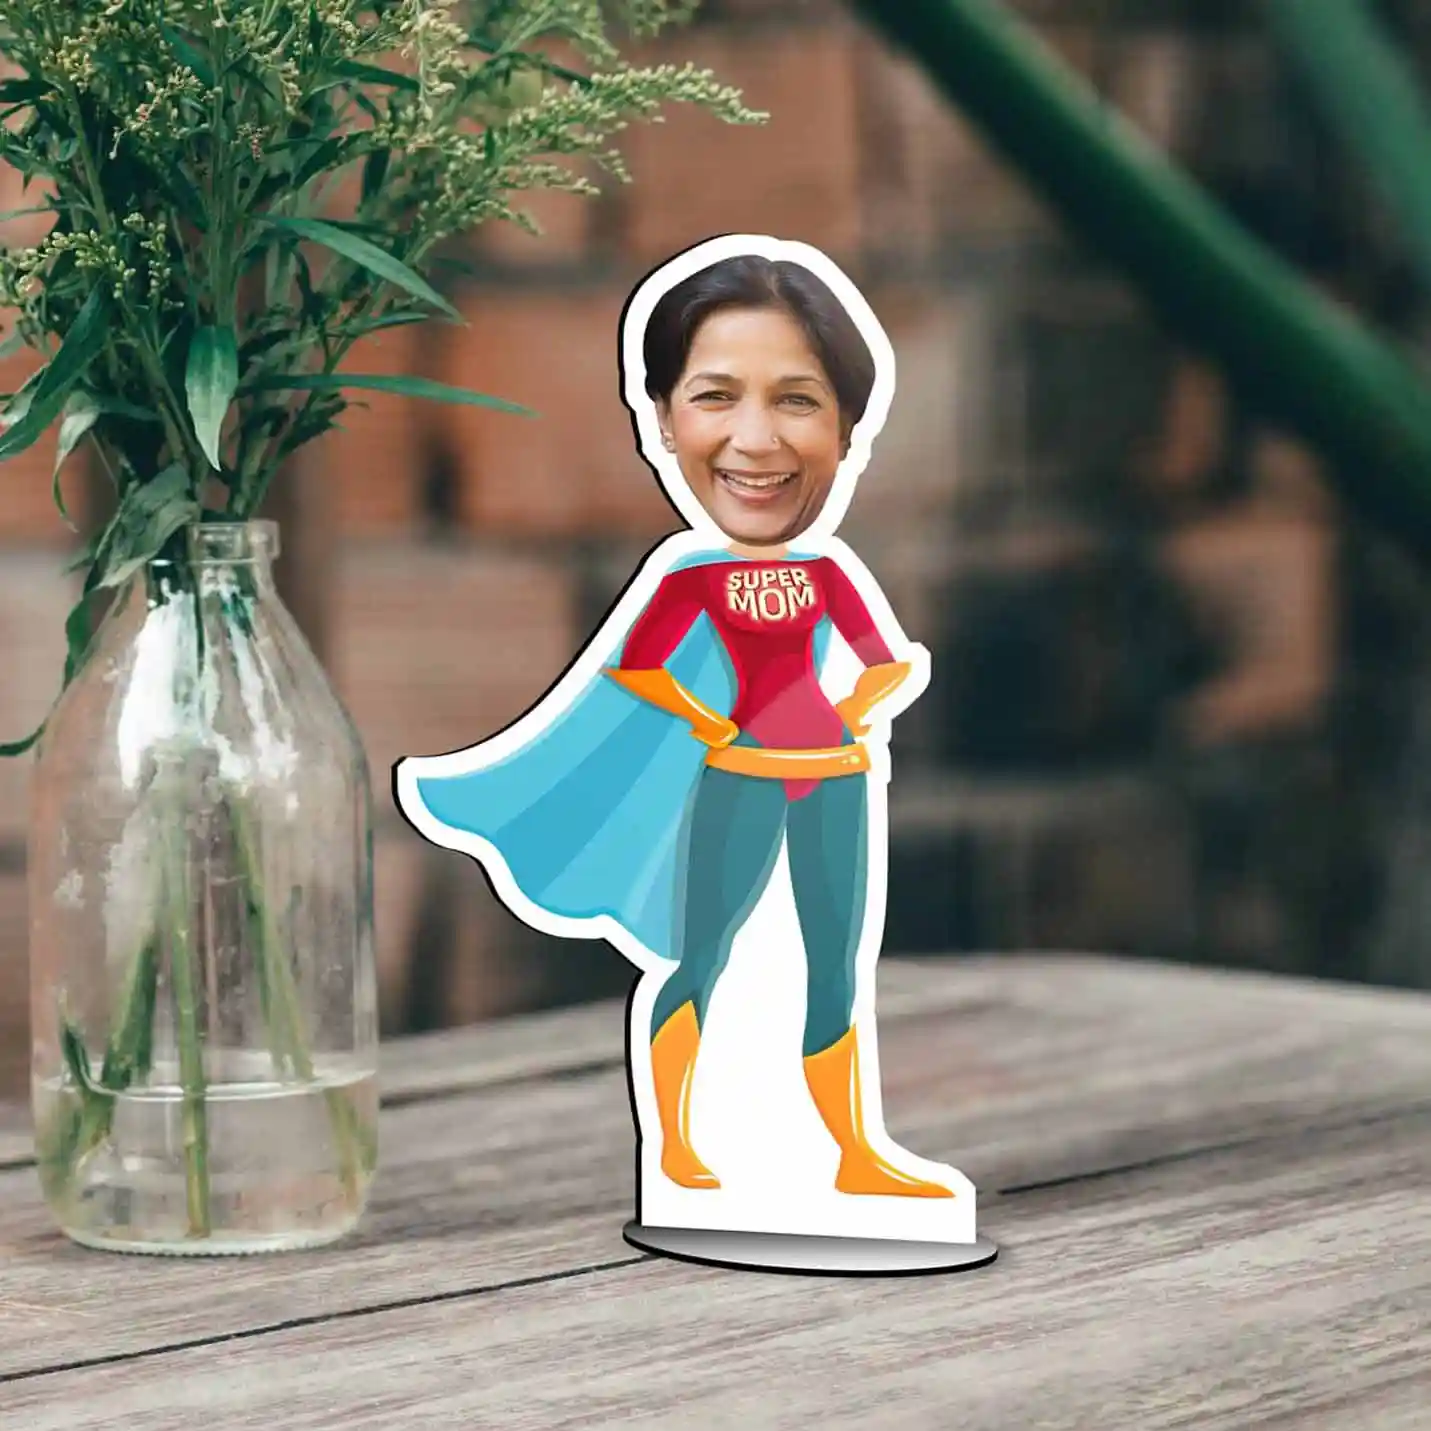 surprise your mom with a replica of her as your “SUPER mom.”